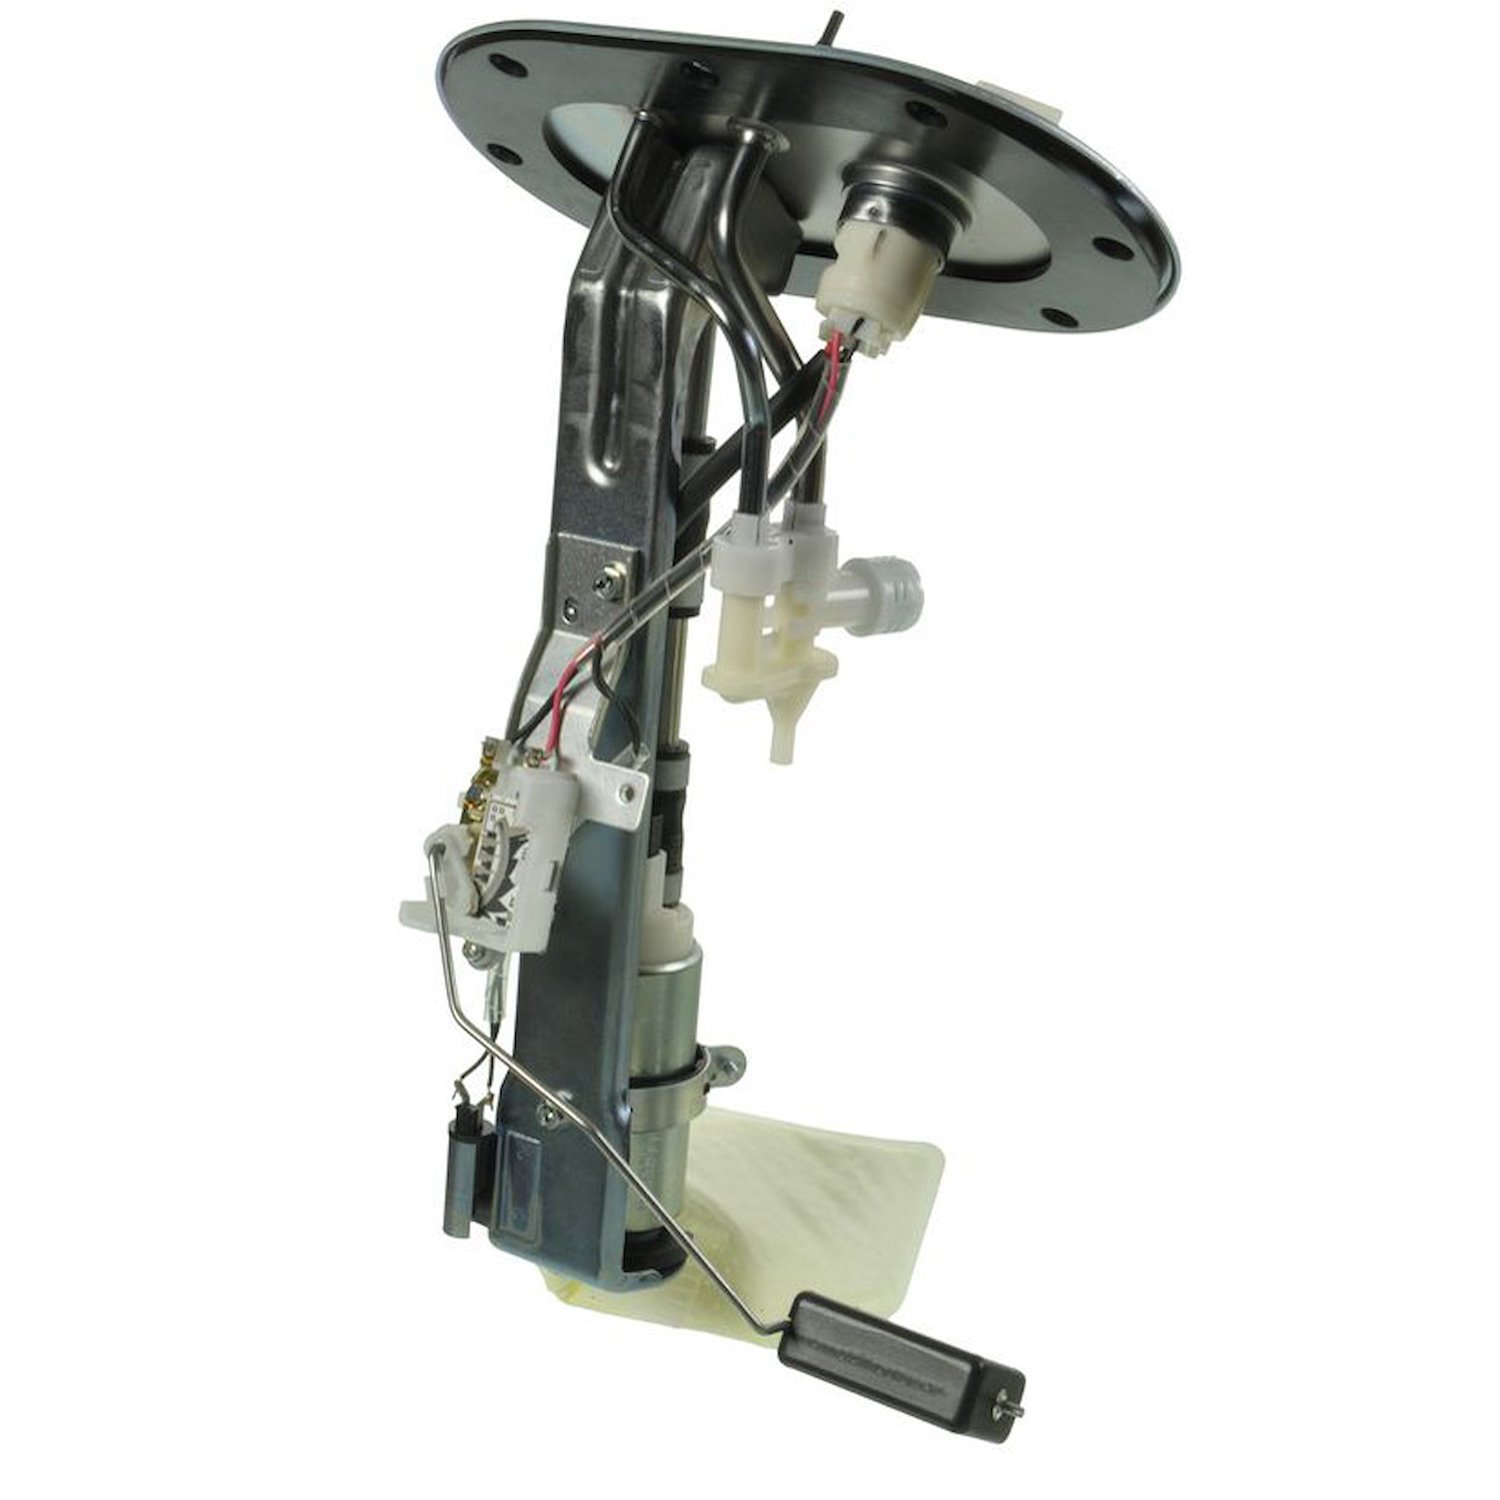 OE Replacement Fuel Pump Module Assembly for 2002-2004